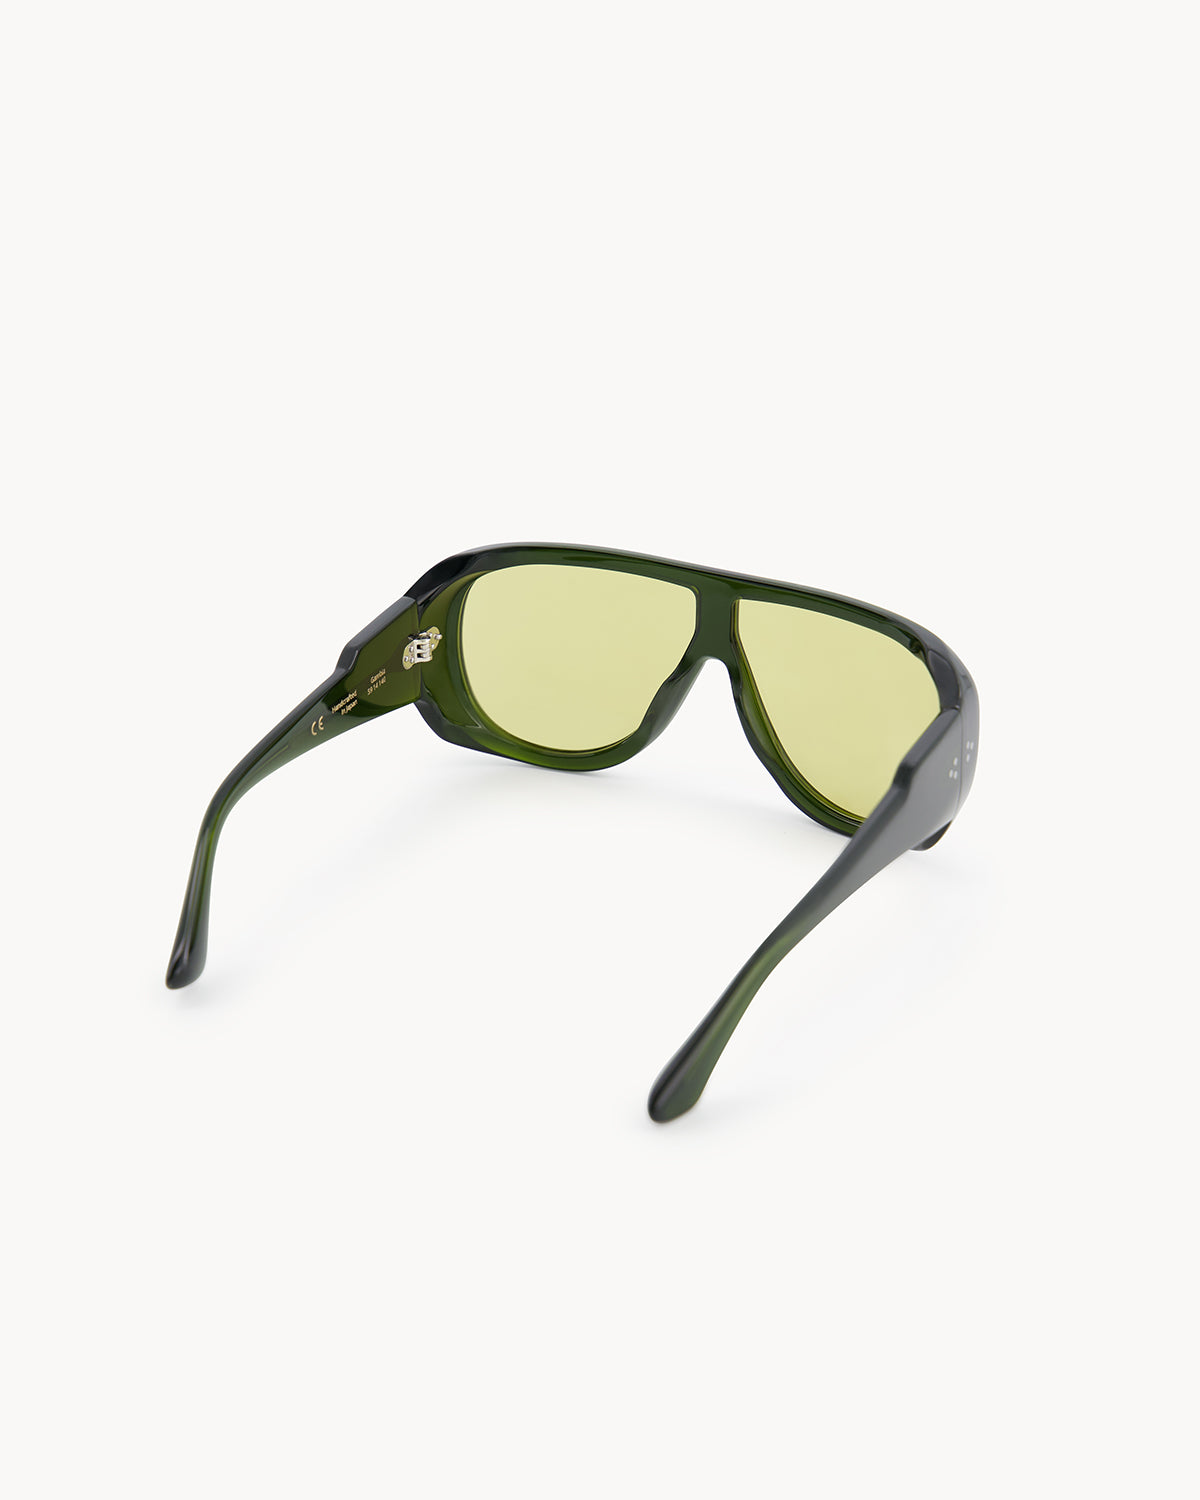 Port Tanger Gambia Sunglasses in Cardamom Acetate and Warm Olive Lenses 3